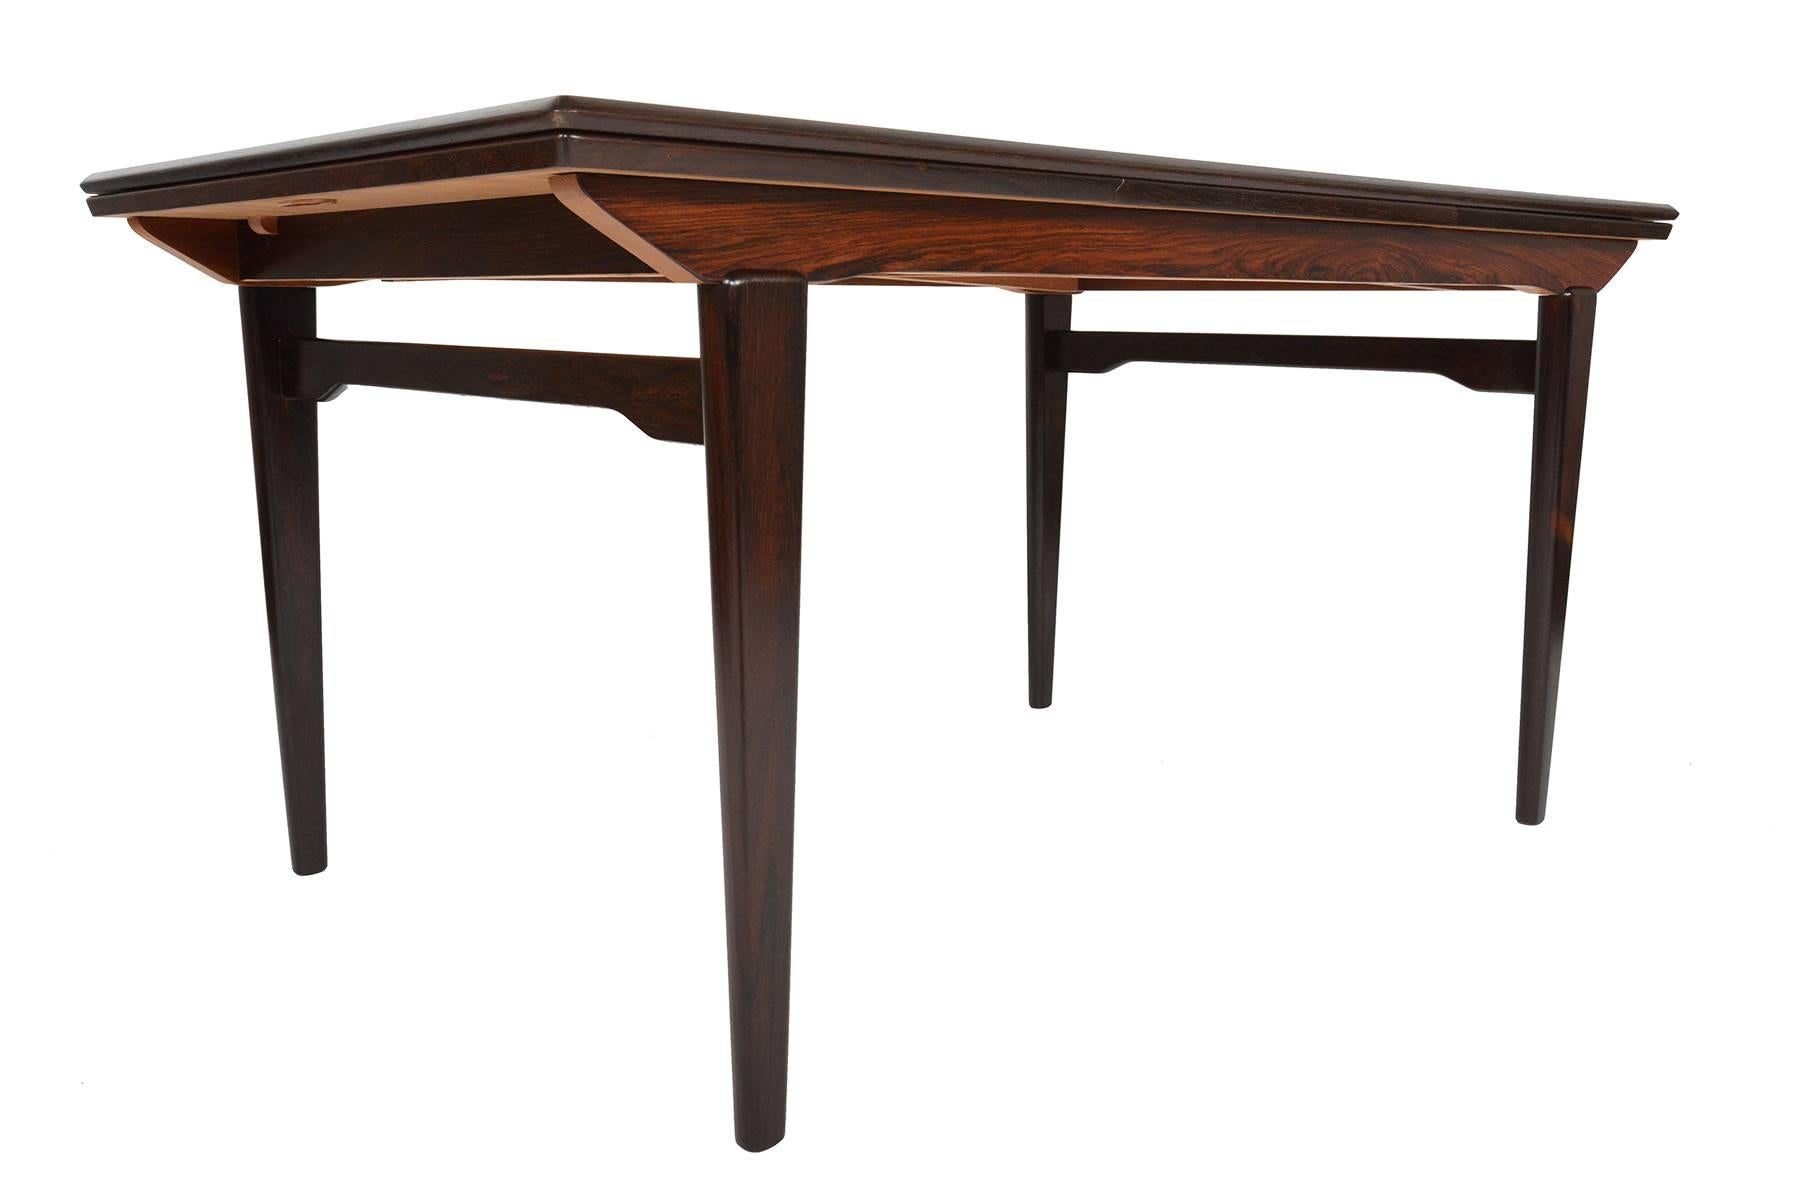 This gorgeous Danish modern Brazilian rosewood dining table offers an angular banding and a well- built braced leg design. Two draw leaves pull-out to almost double the size of the table for entertaining. Recently refinished and in excellent